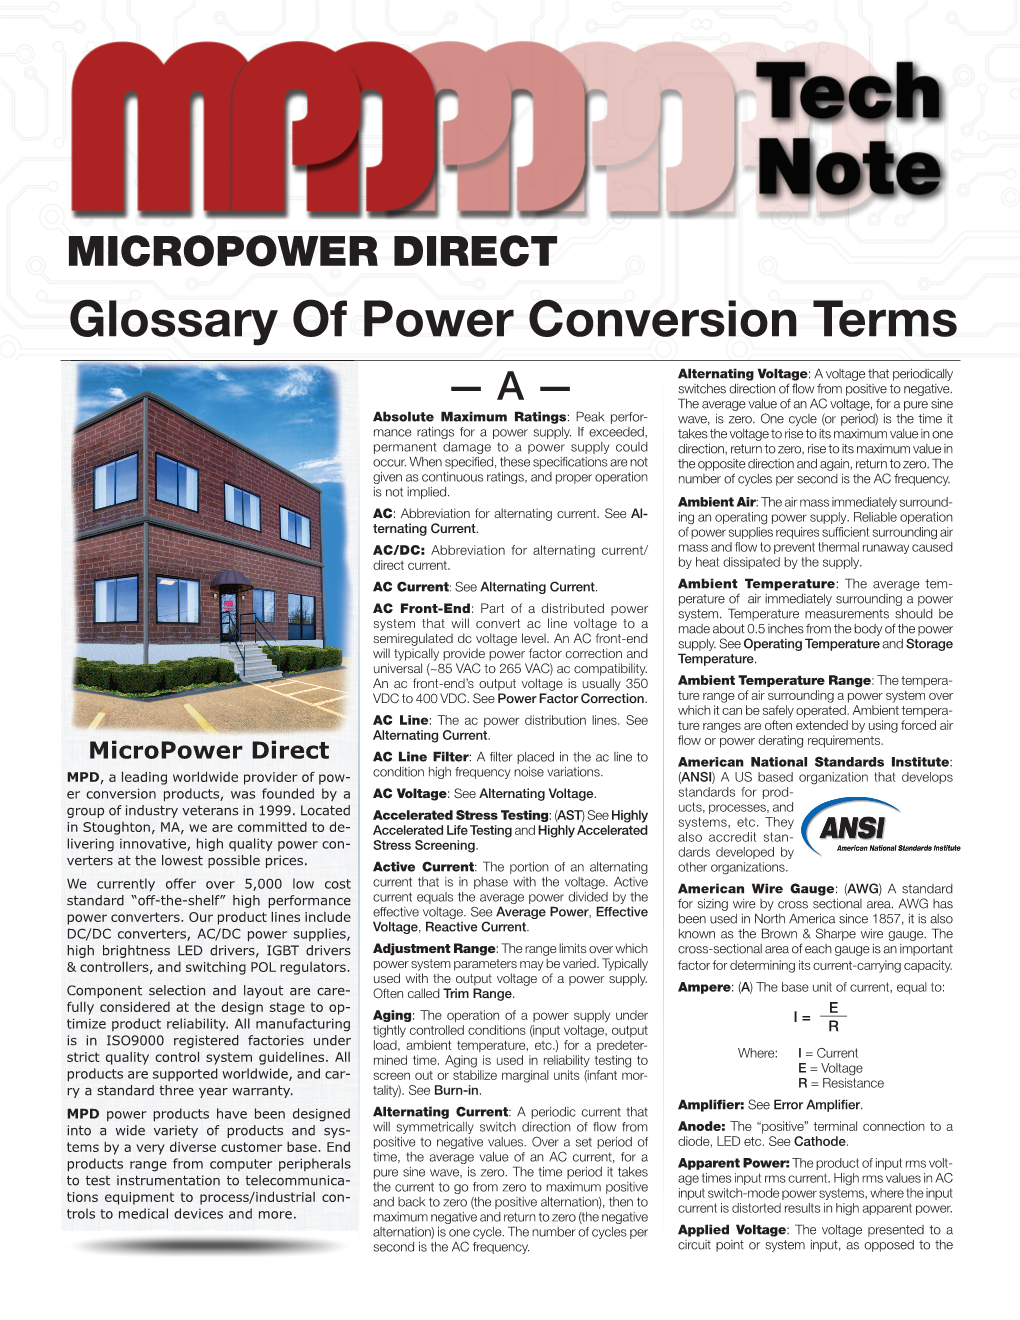 Micropower Direct Power Glossary